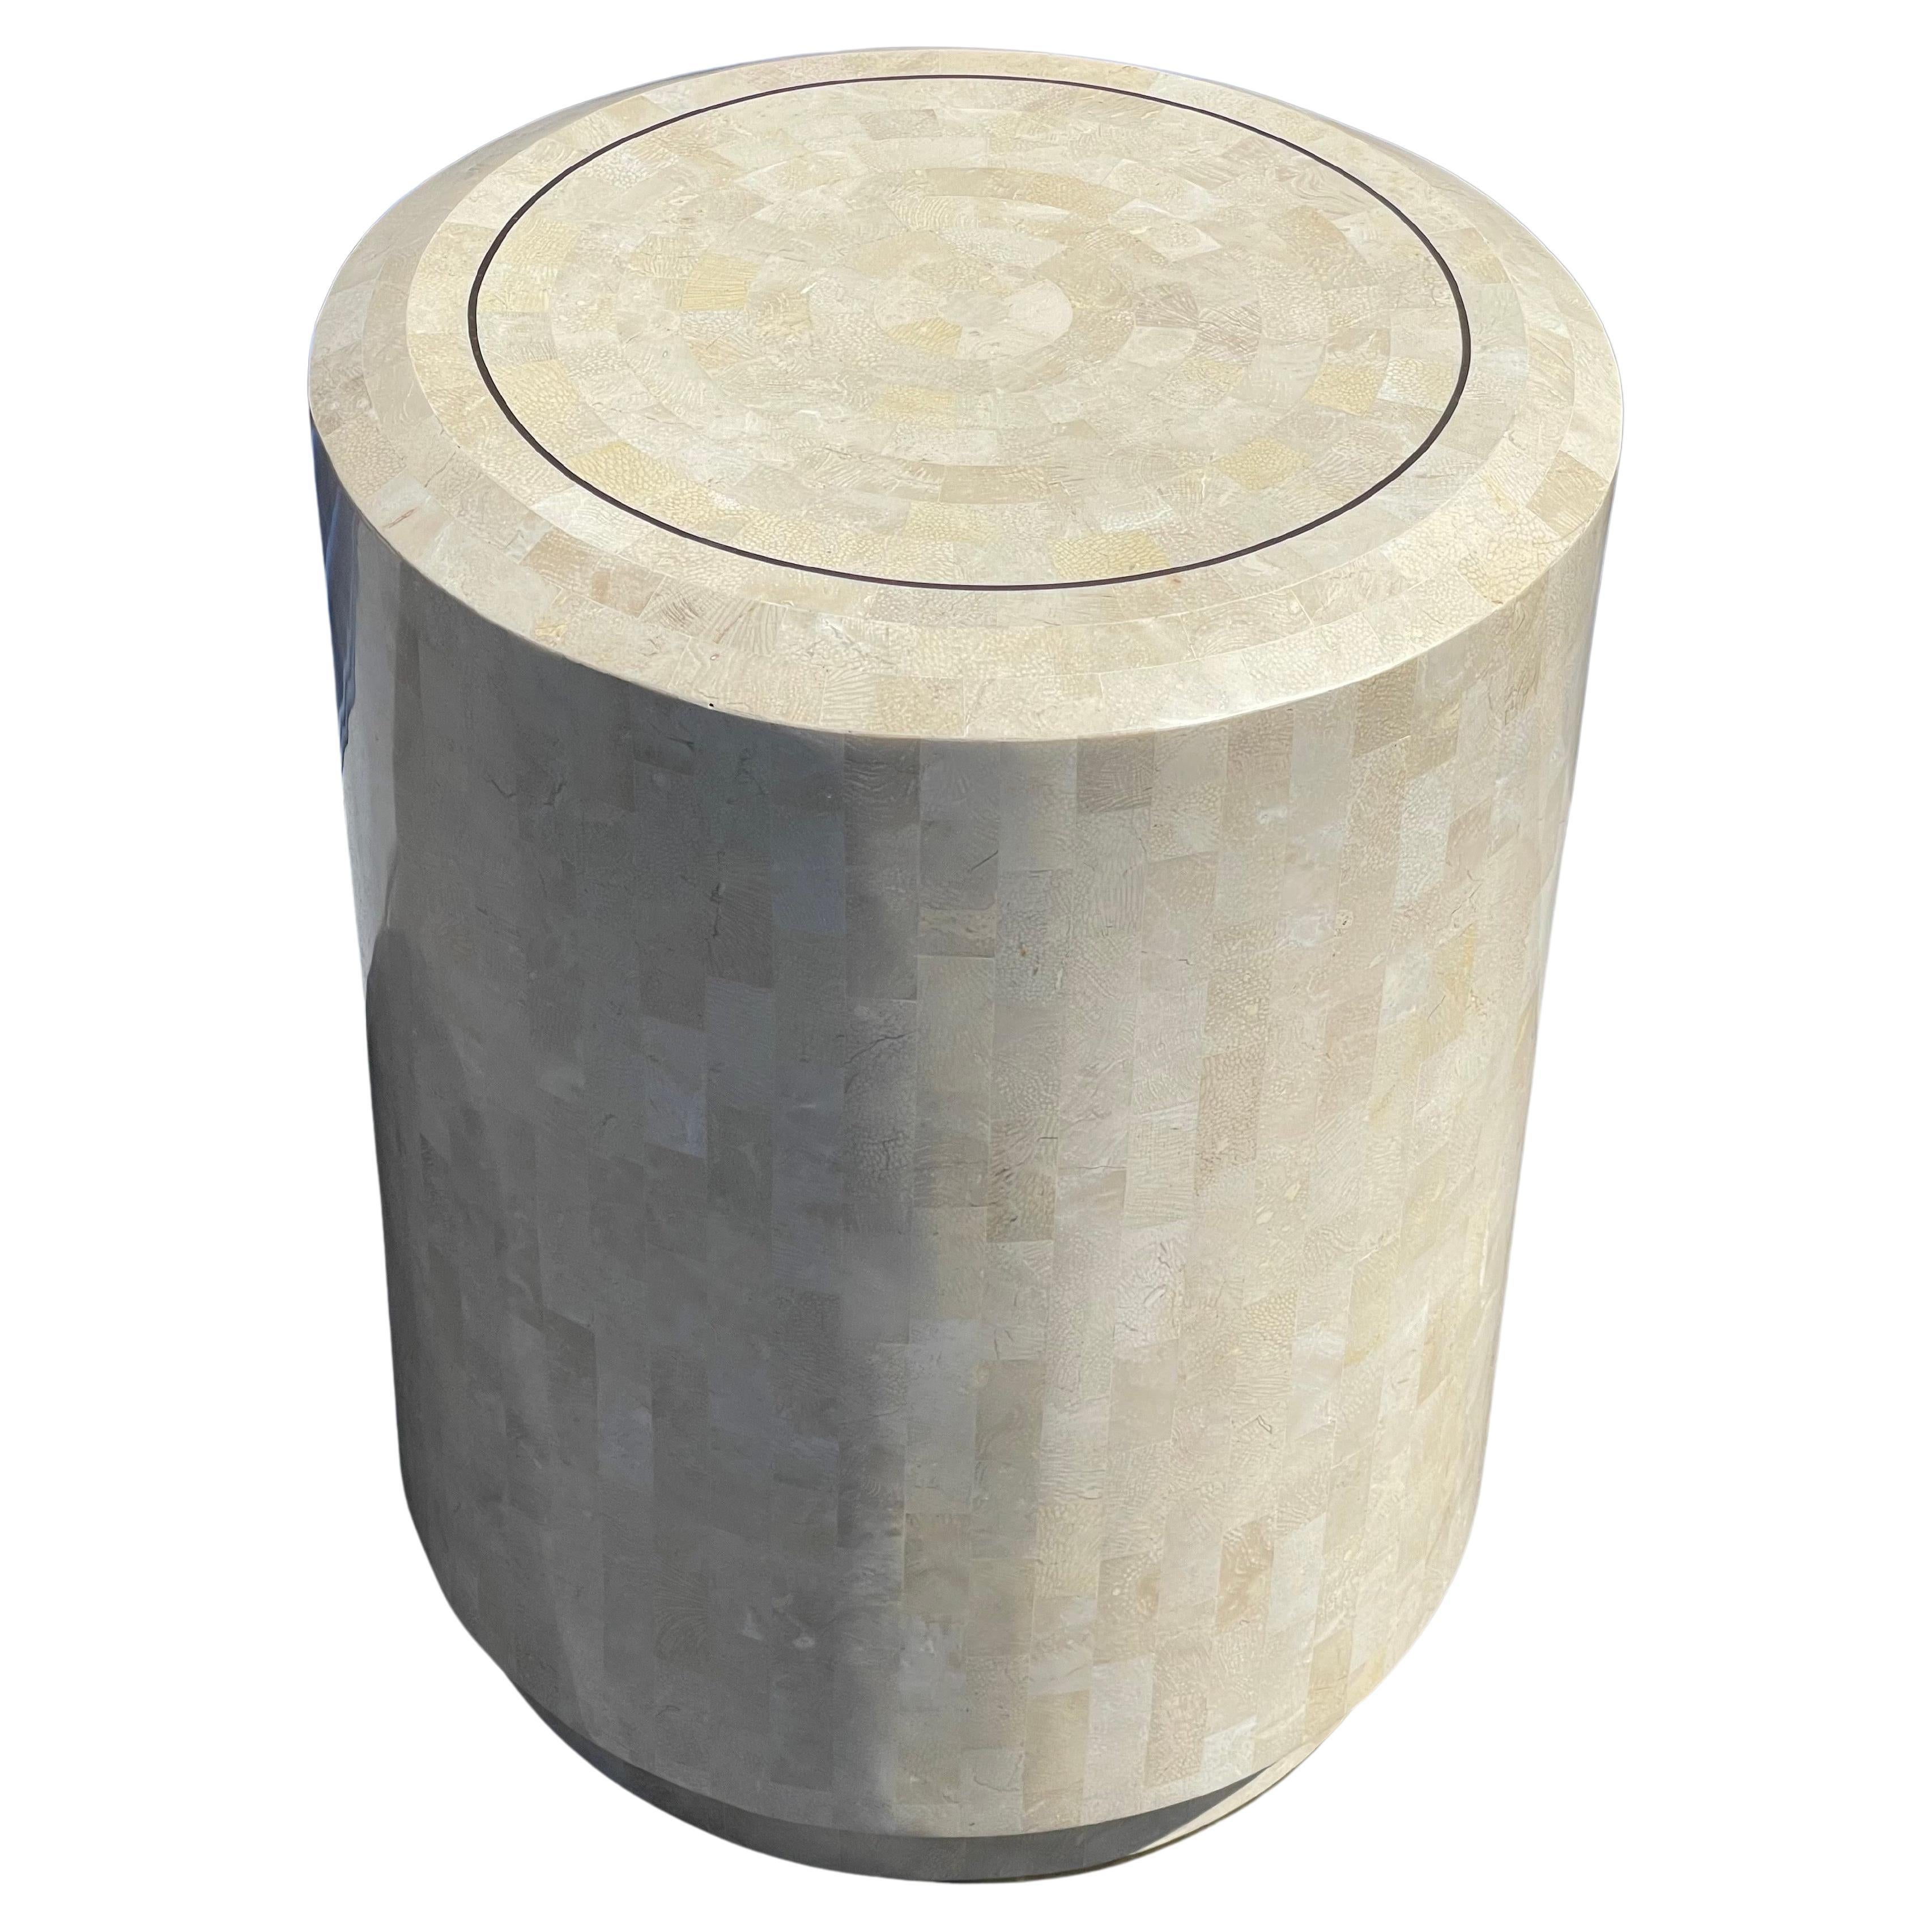 Tessellated Stone Pedestal / Side Table with Brass Accents by Maitland Smith